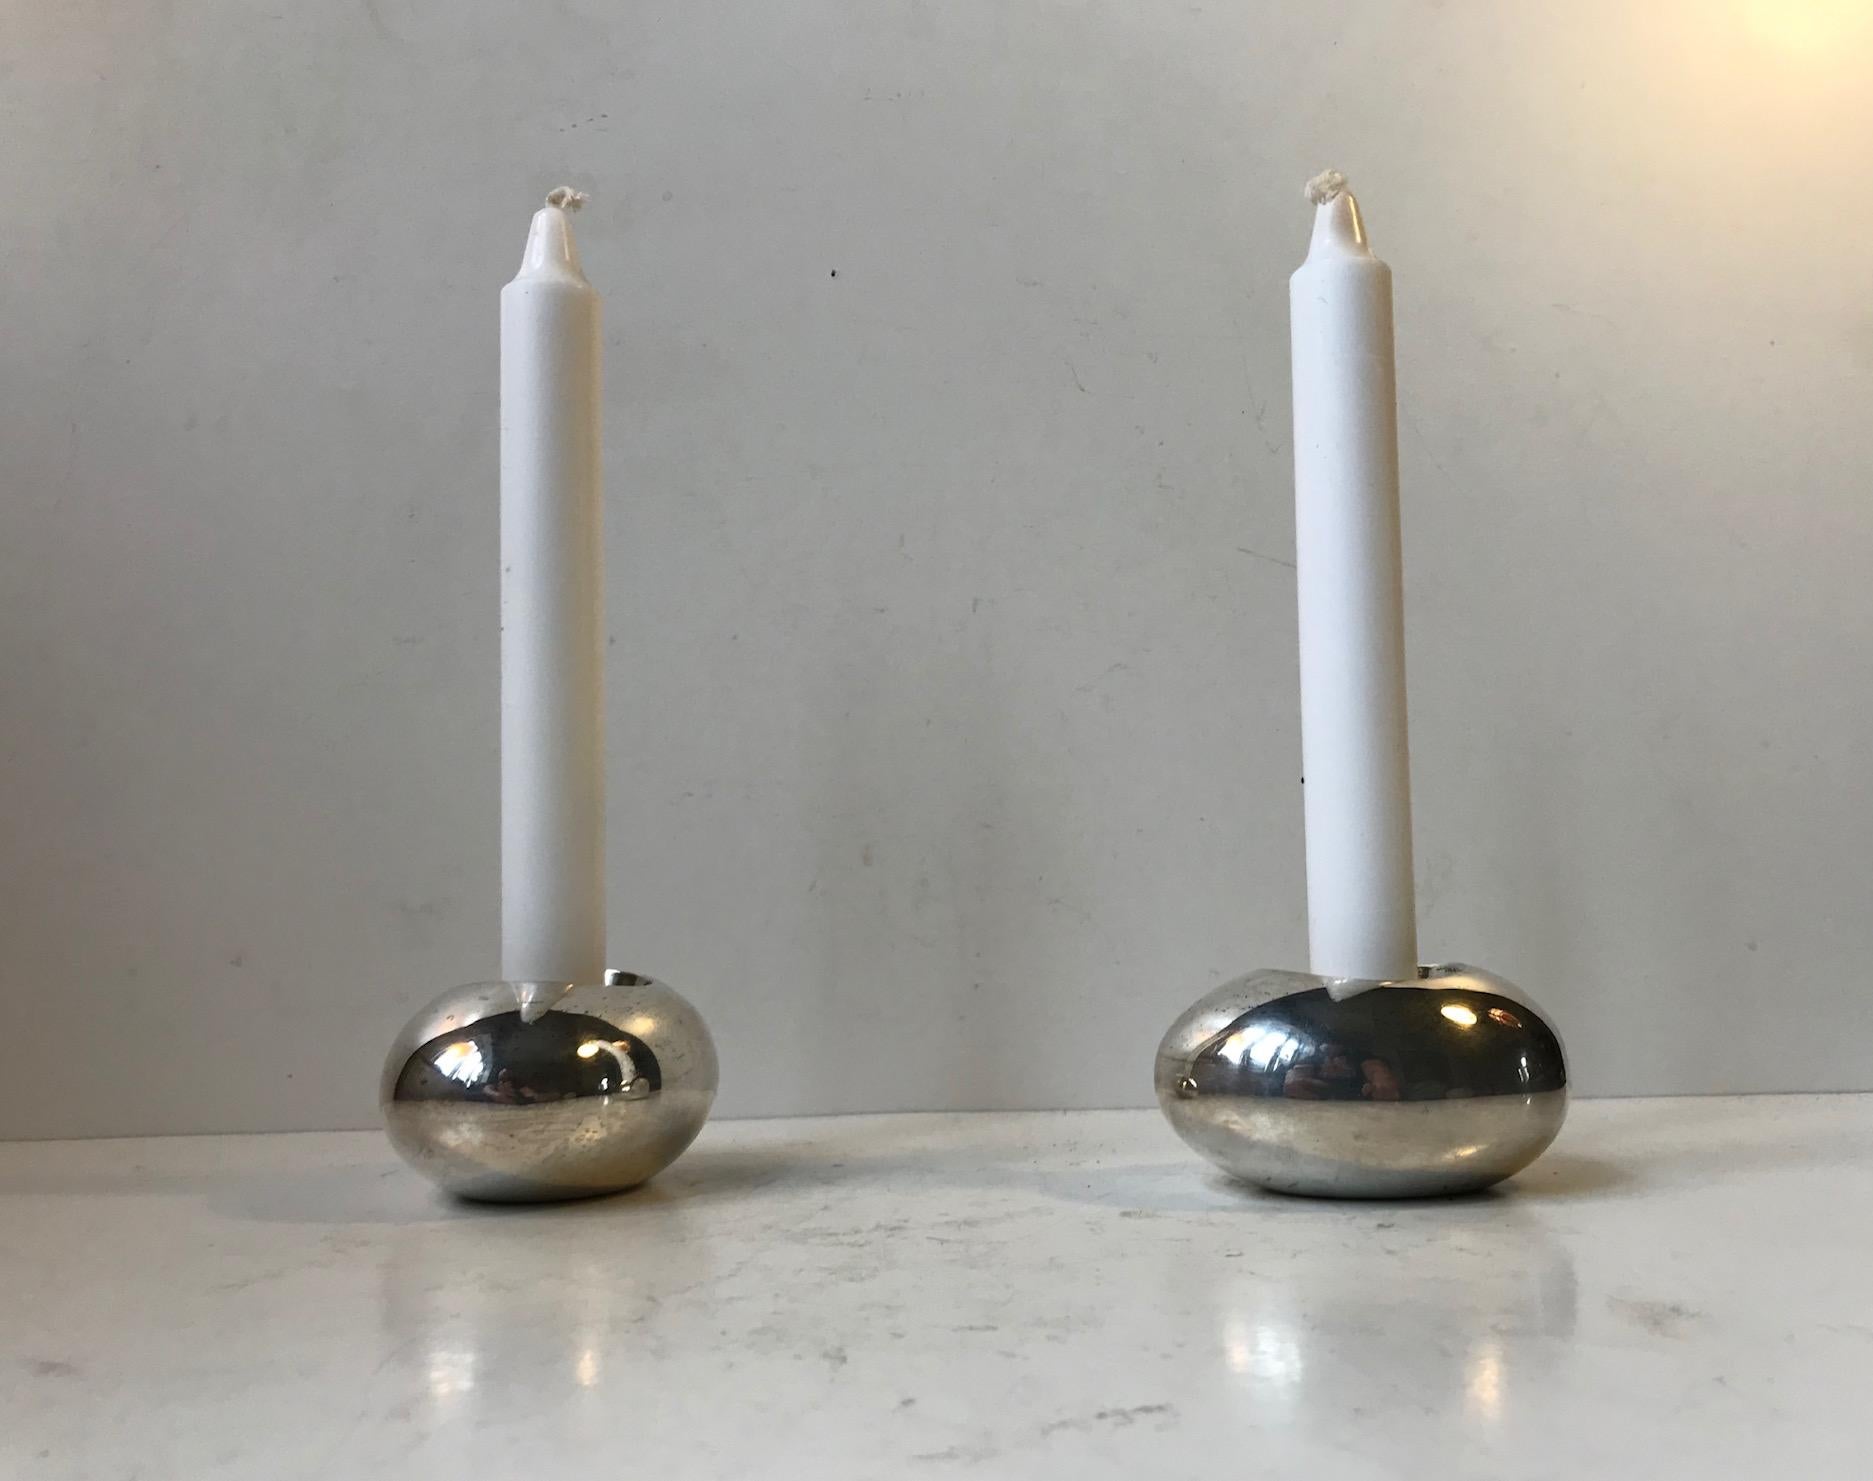 A pair of rare candlesticks in silver plated brass shaped like eggs. Designed and manufactured at Carl Cohr in Denmark during the 1950s. Stamped Cohr, Denmark to the base. It takes regular sized candles.